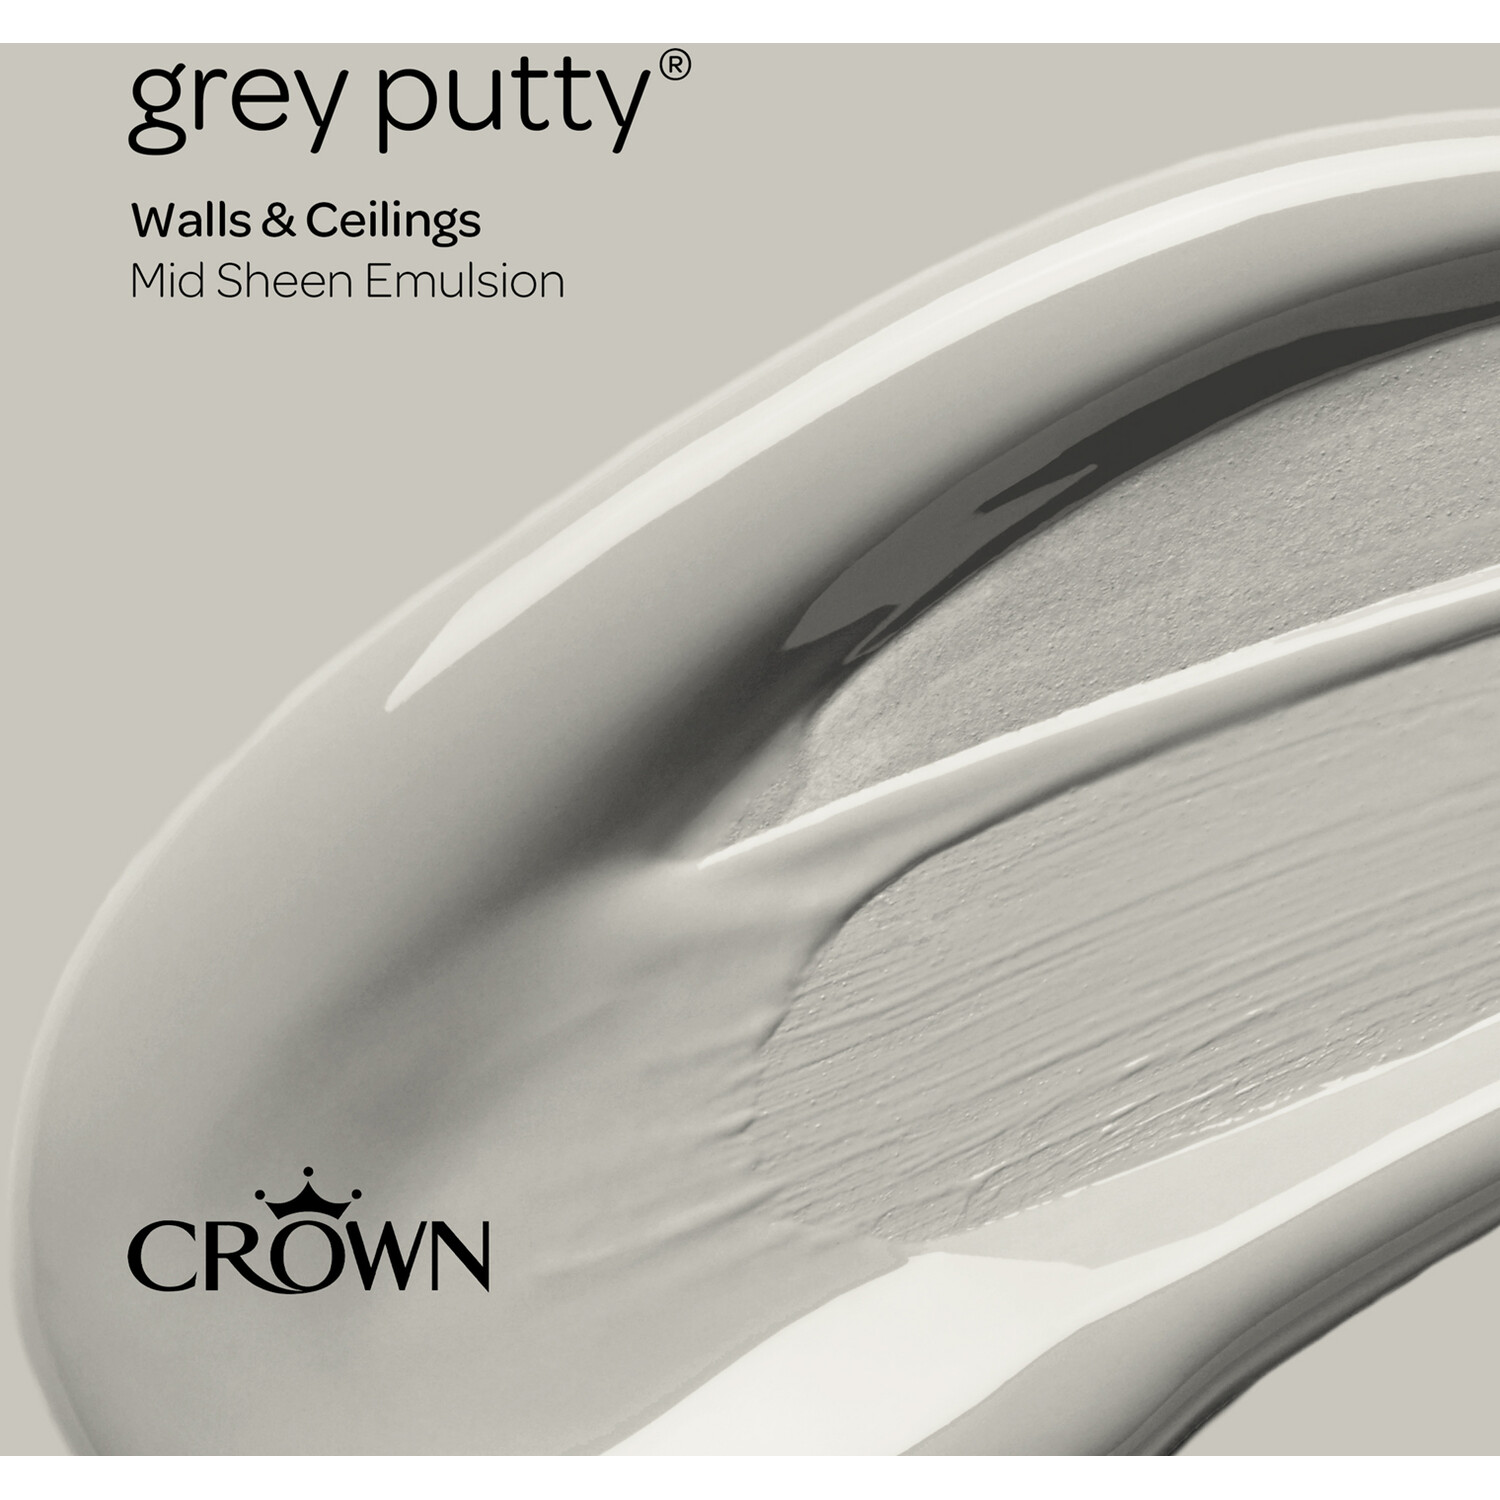 Crown Walls & Ceilings Grey Putty Mid Sheen Emulsion Paint 2.5L Image 4